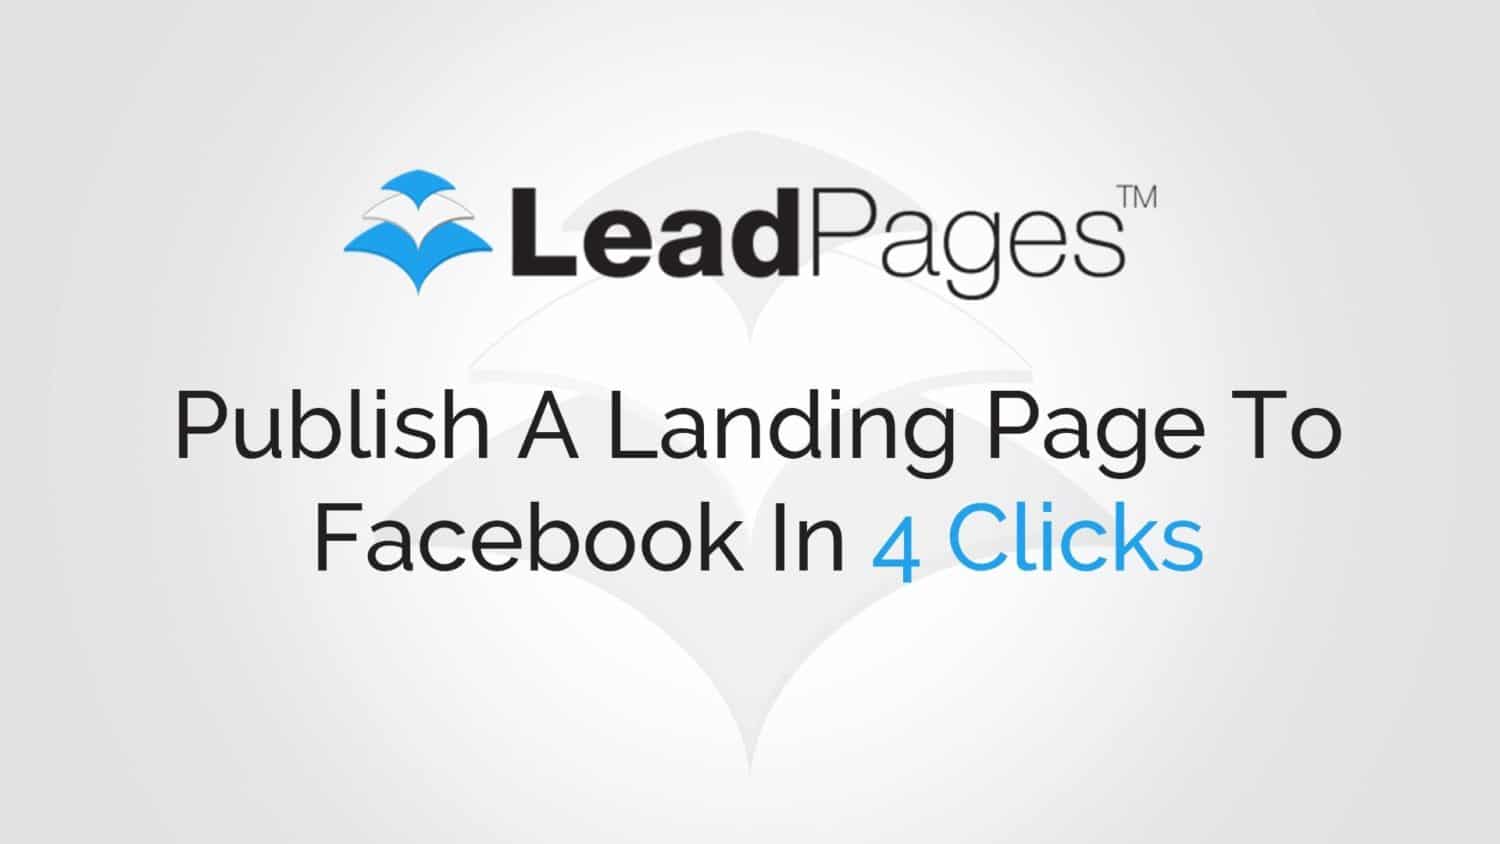 Leadpages for list building | Abask Marketing